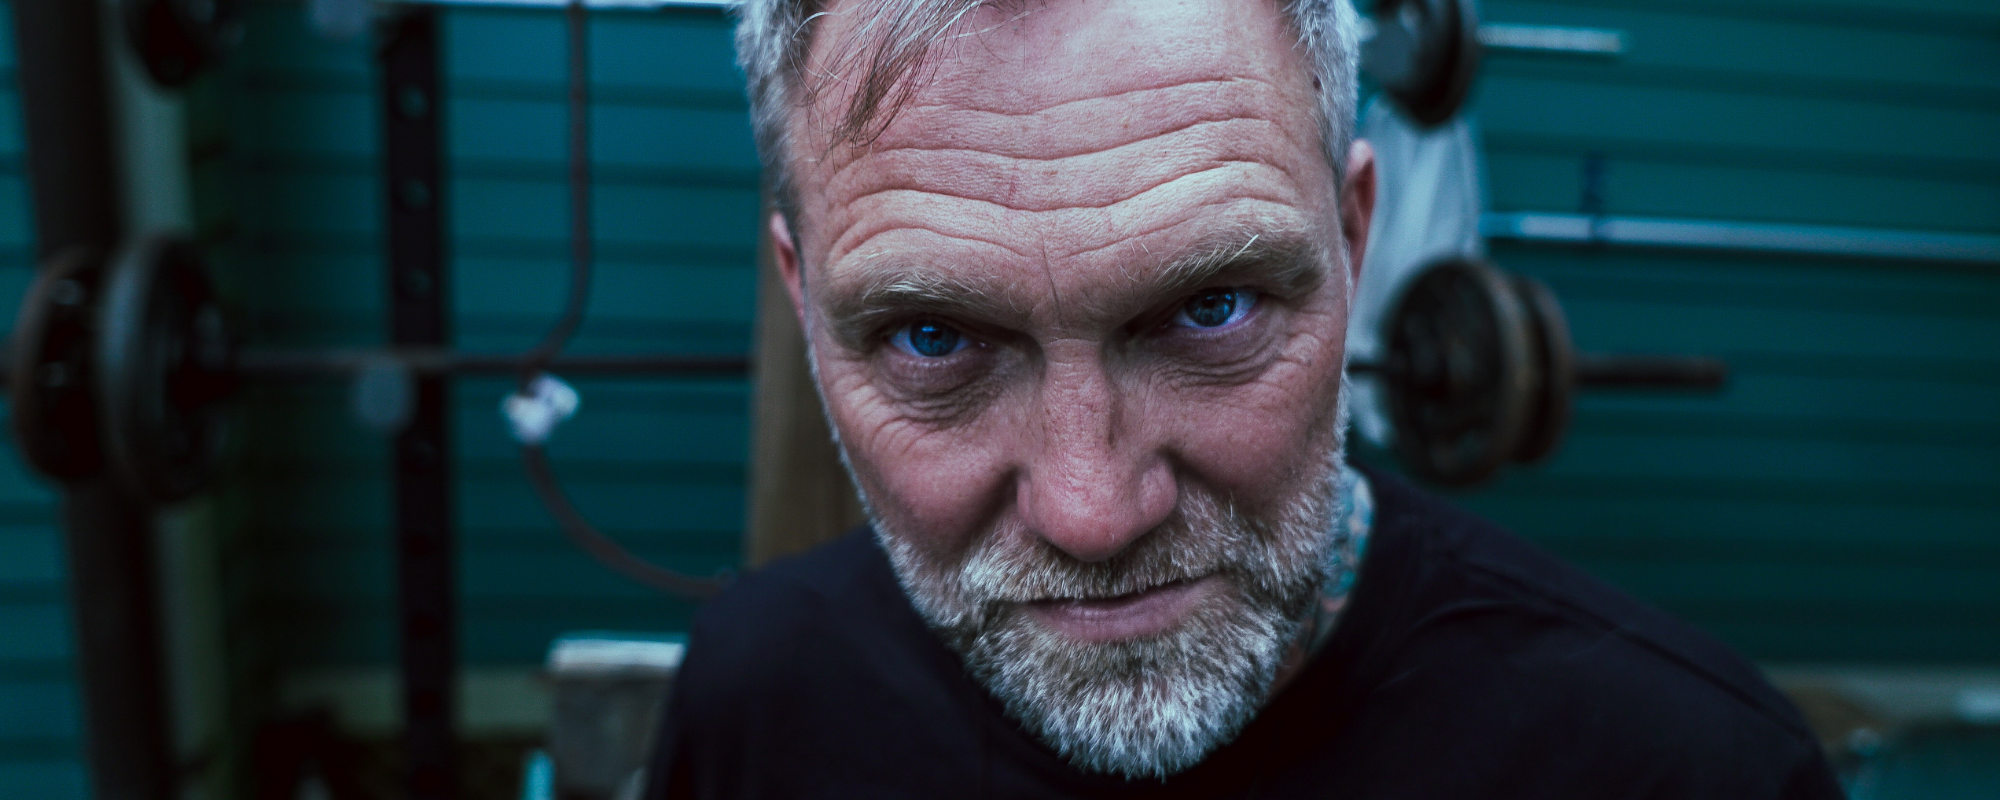 30 Years In, Anders Osborne Strips Down to His Truest Form for ‘Orpheus and the Mermaids’